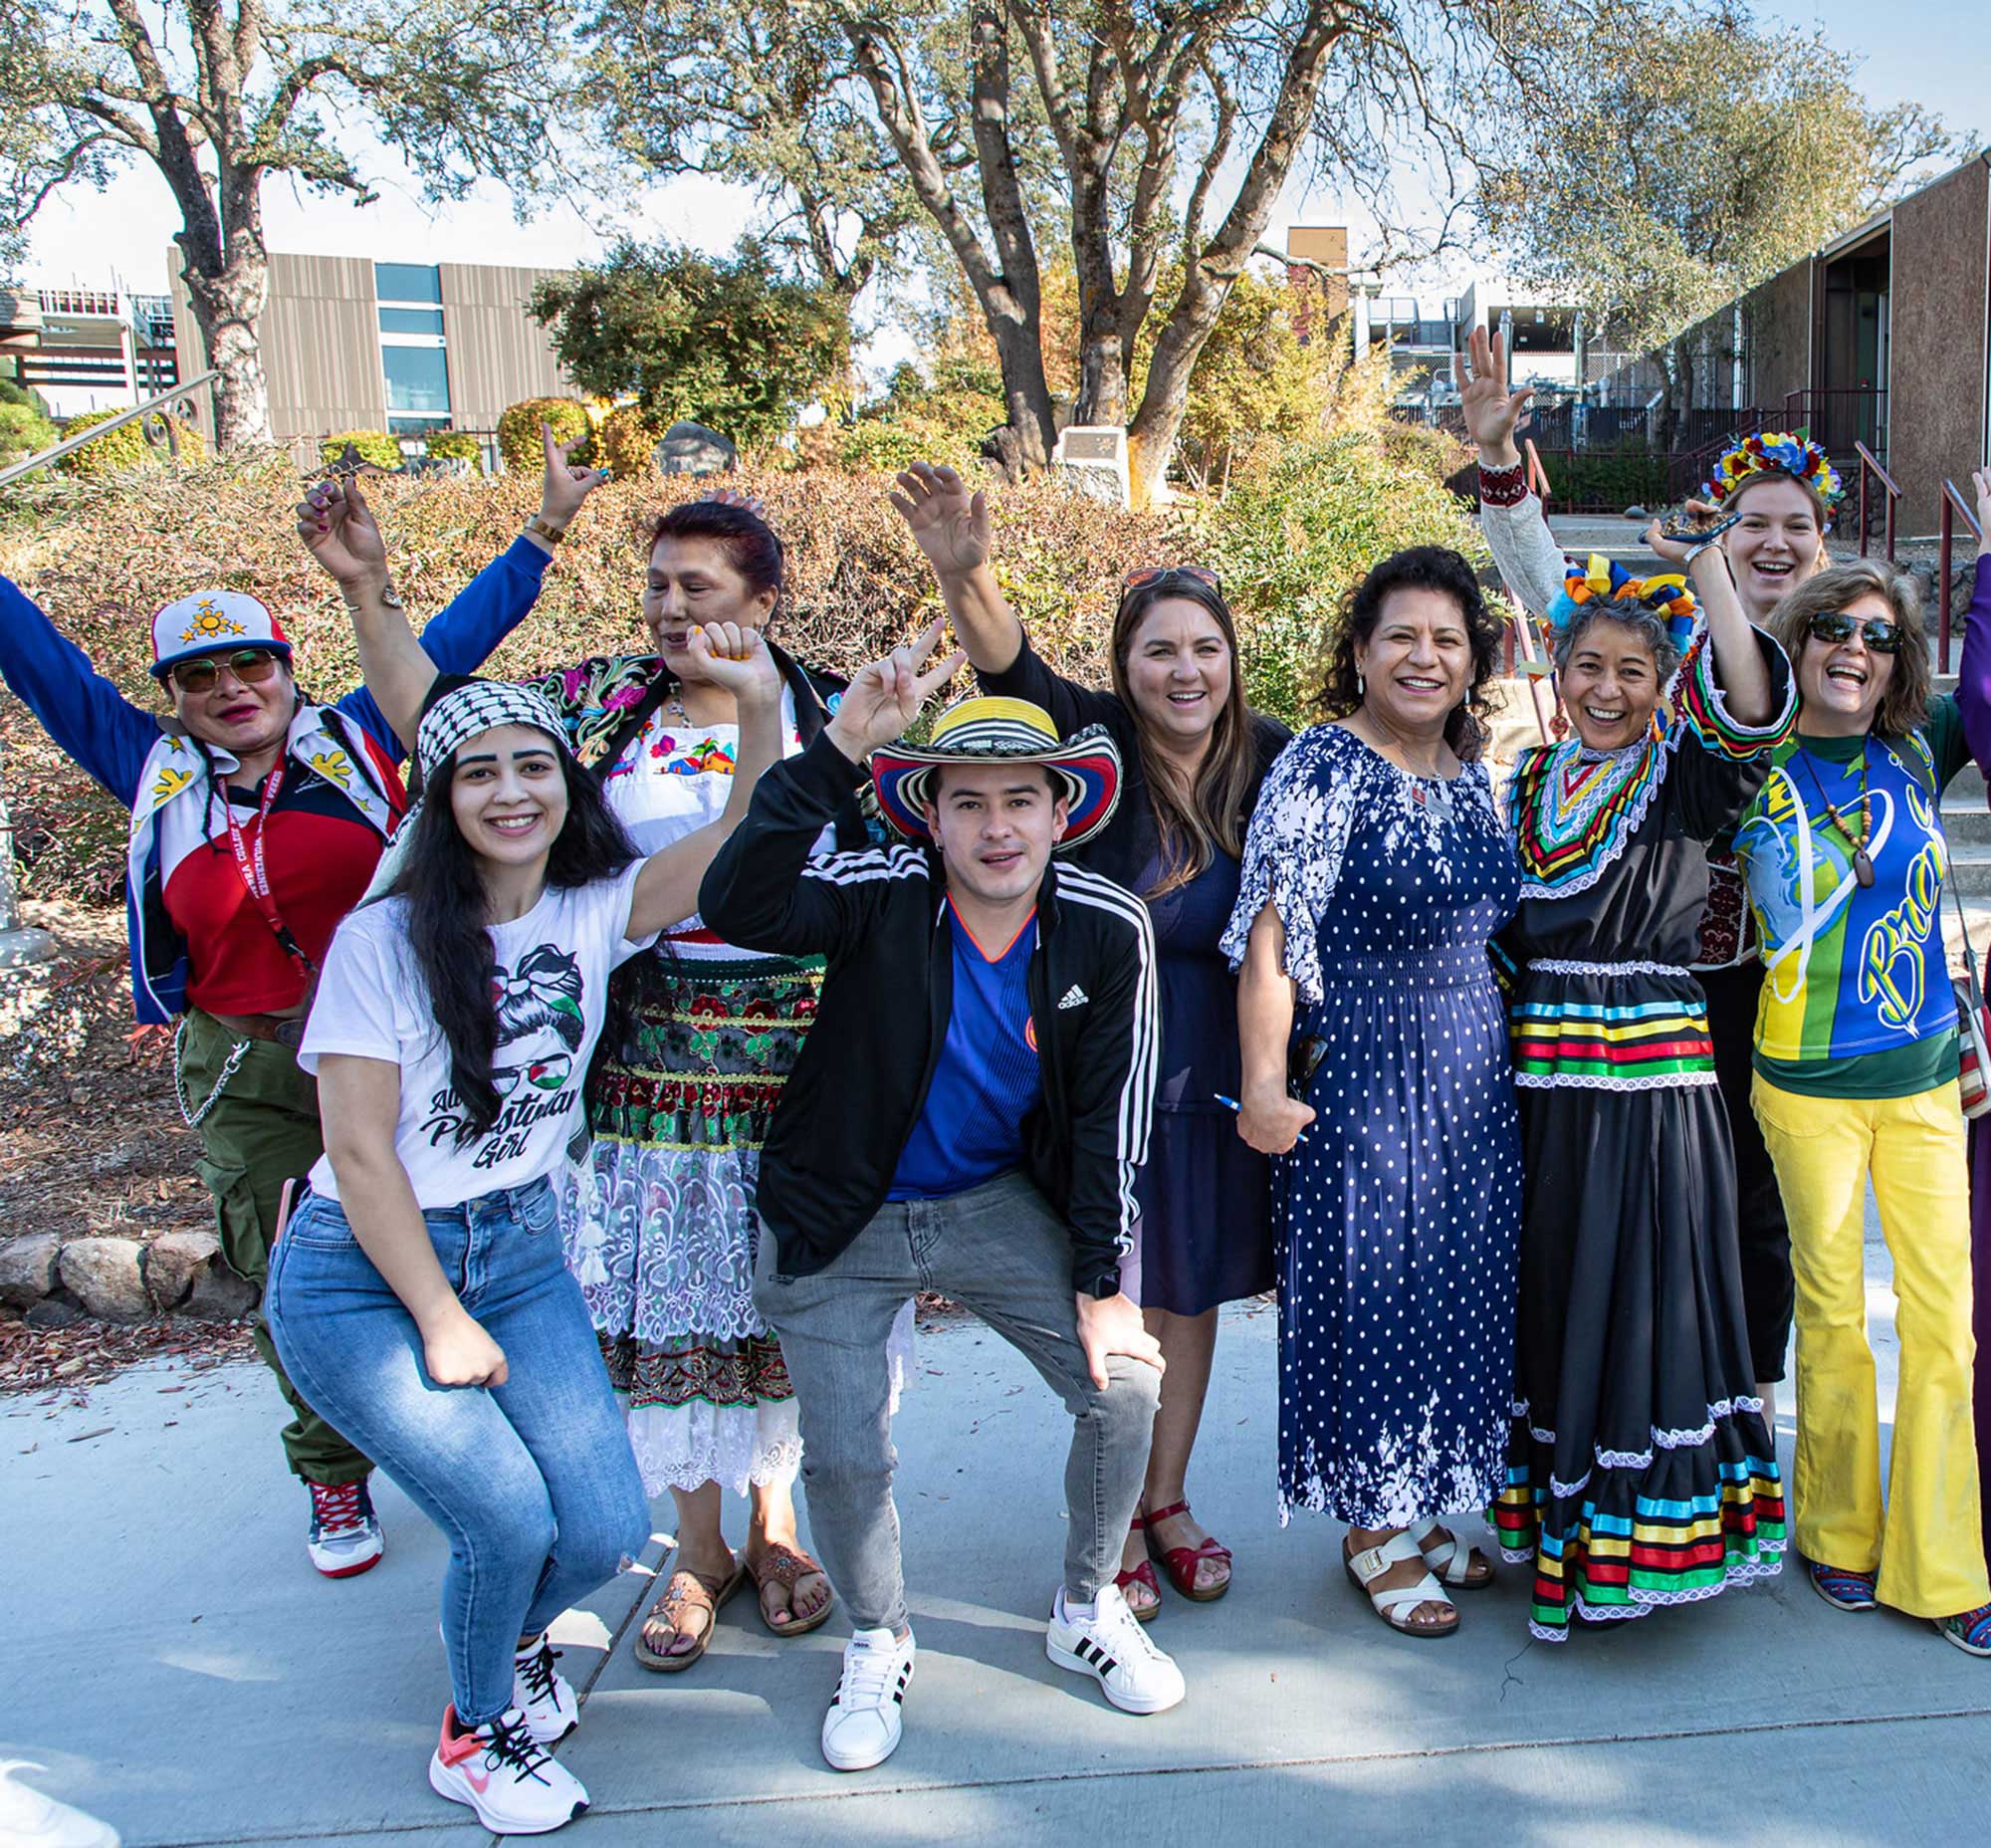 A group of Latino and Latina people celebrate their culture